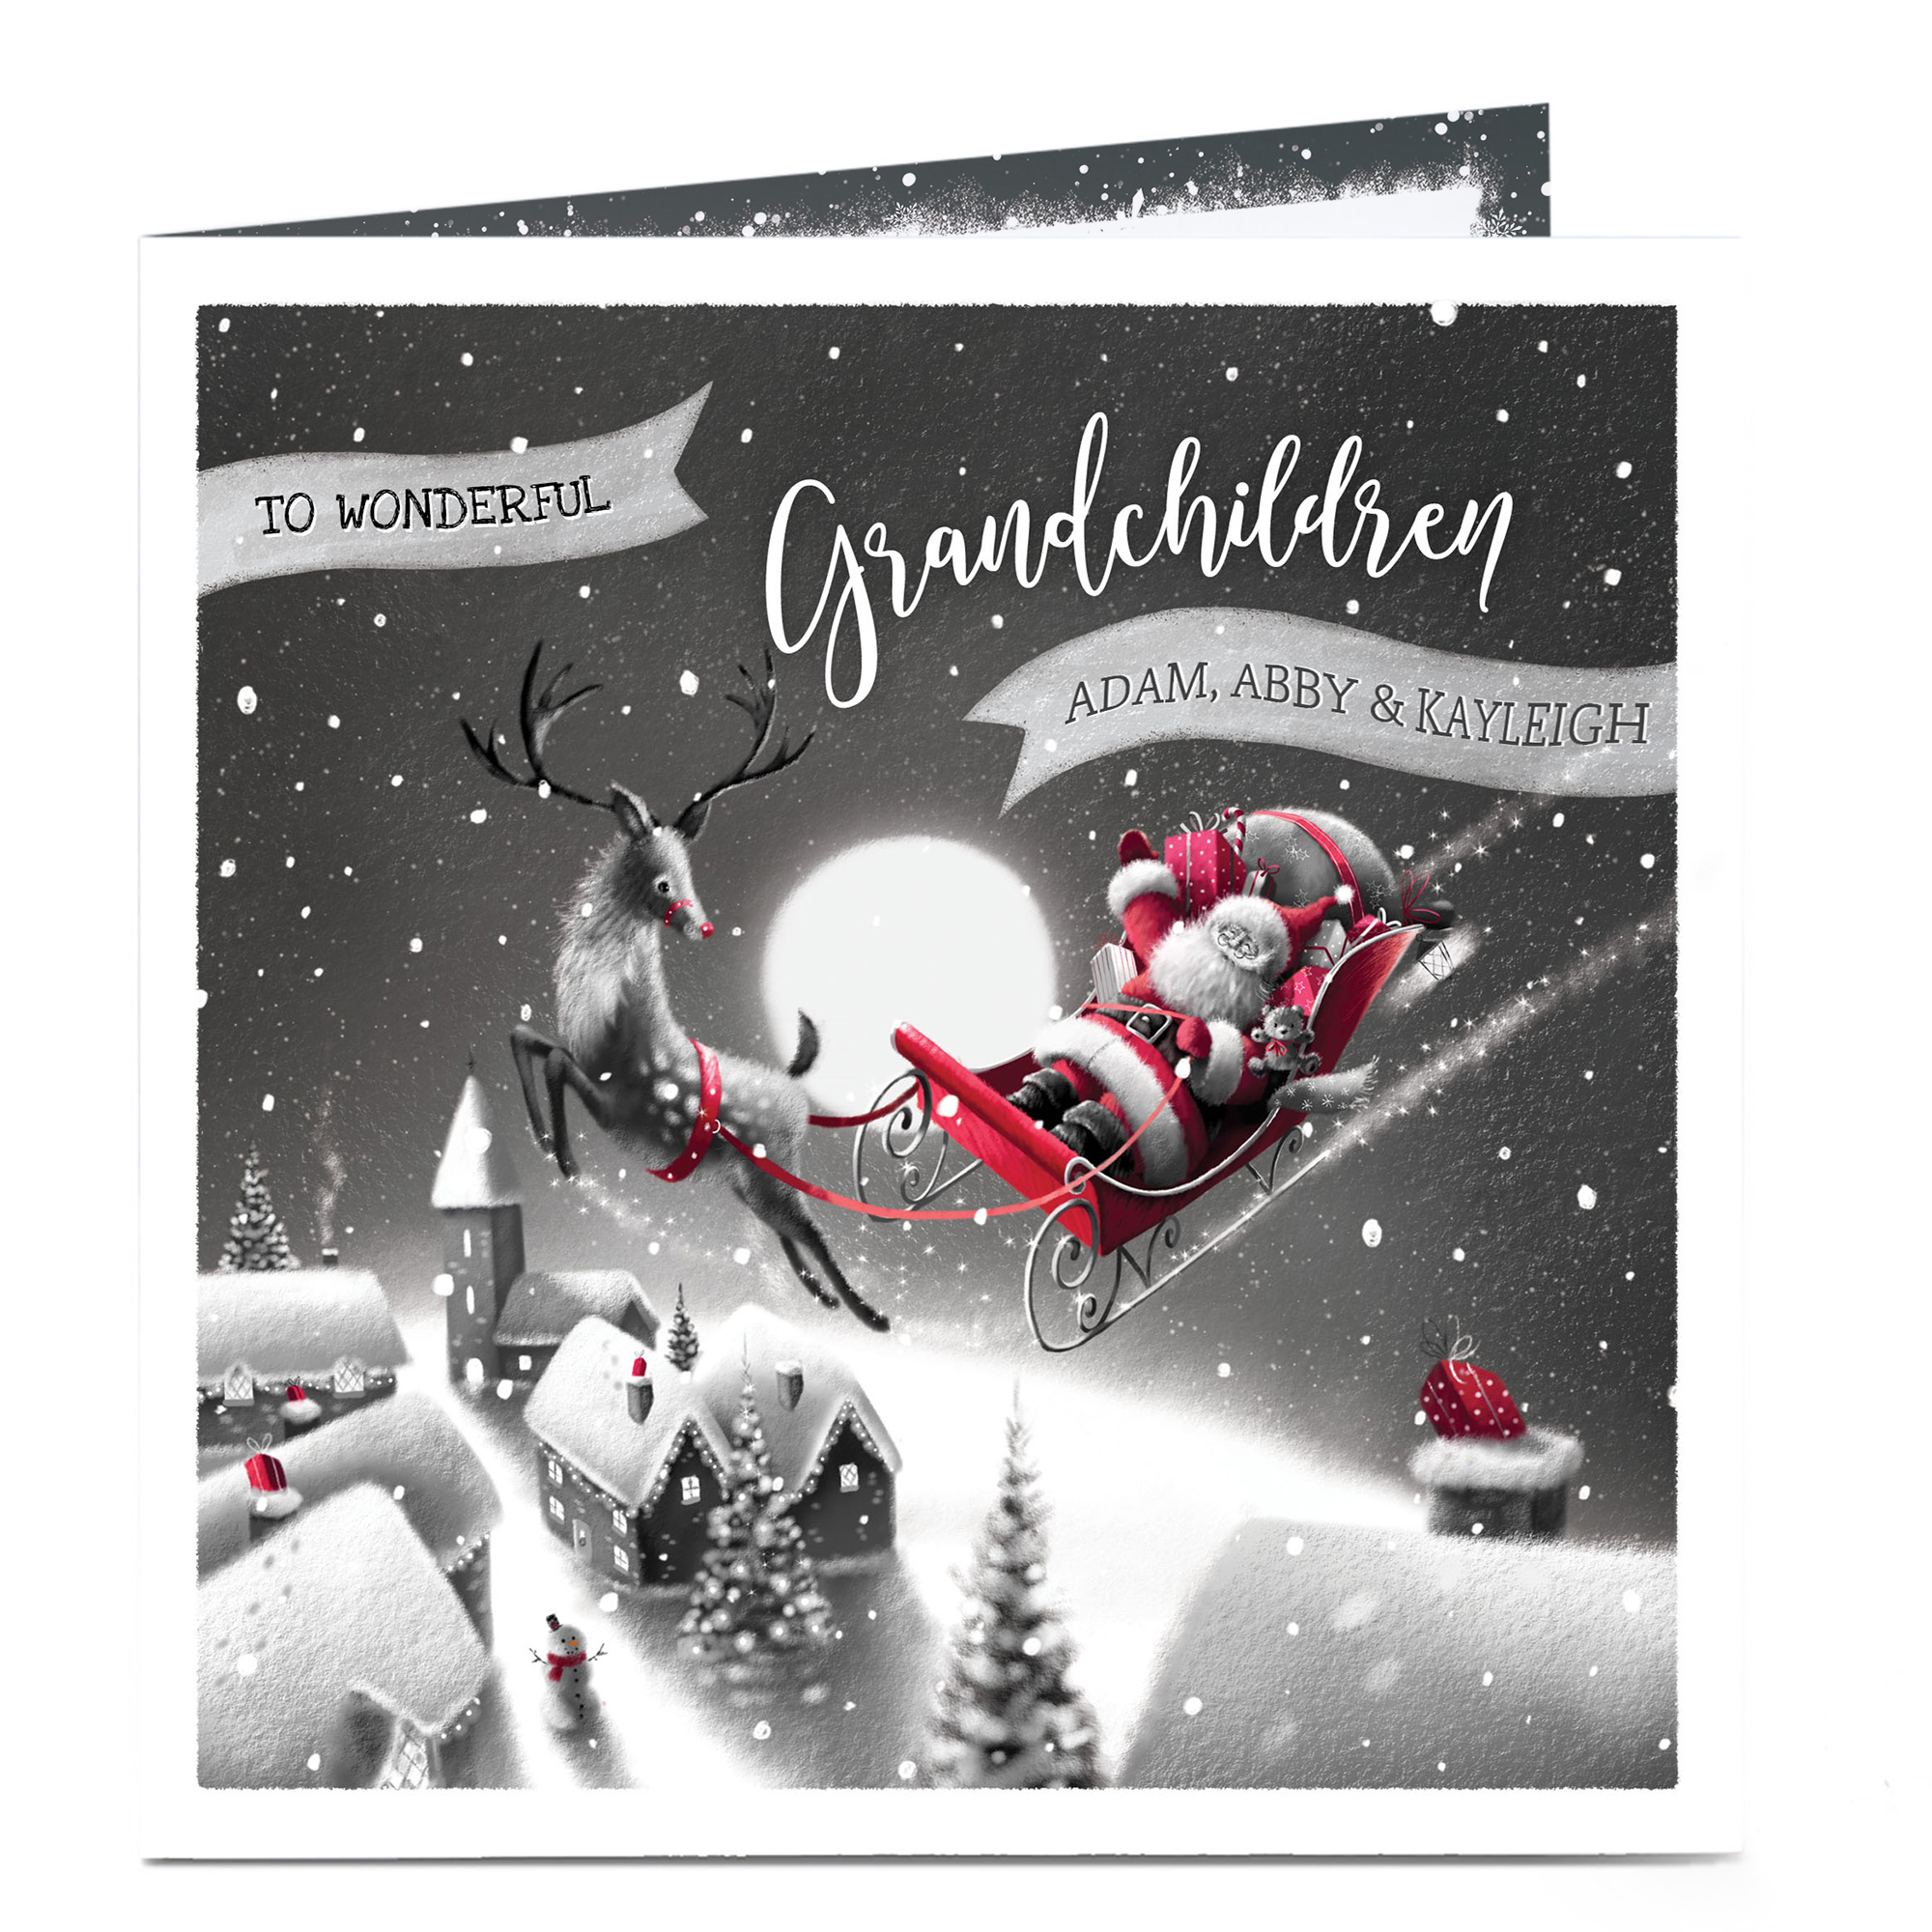 Buy Personalised Christmas Card For Wonderful Grandchildren For Gbp 2 79 Card Factory Uk